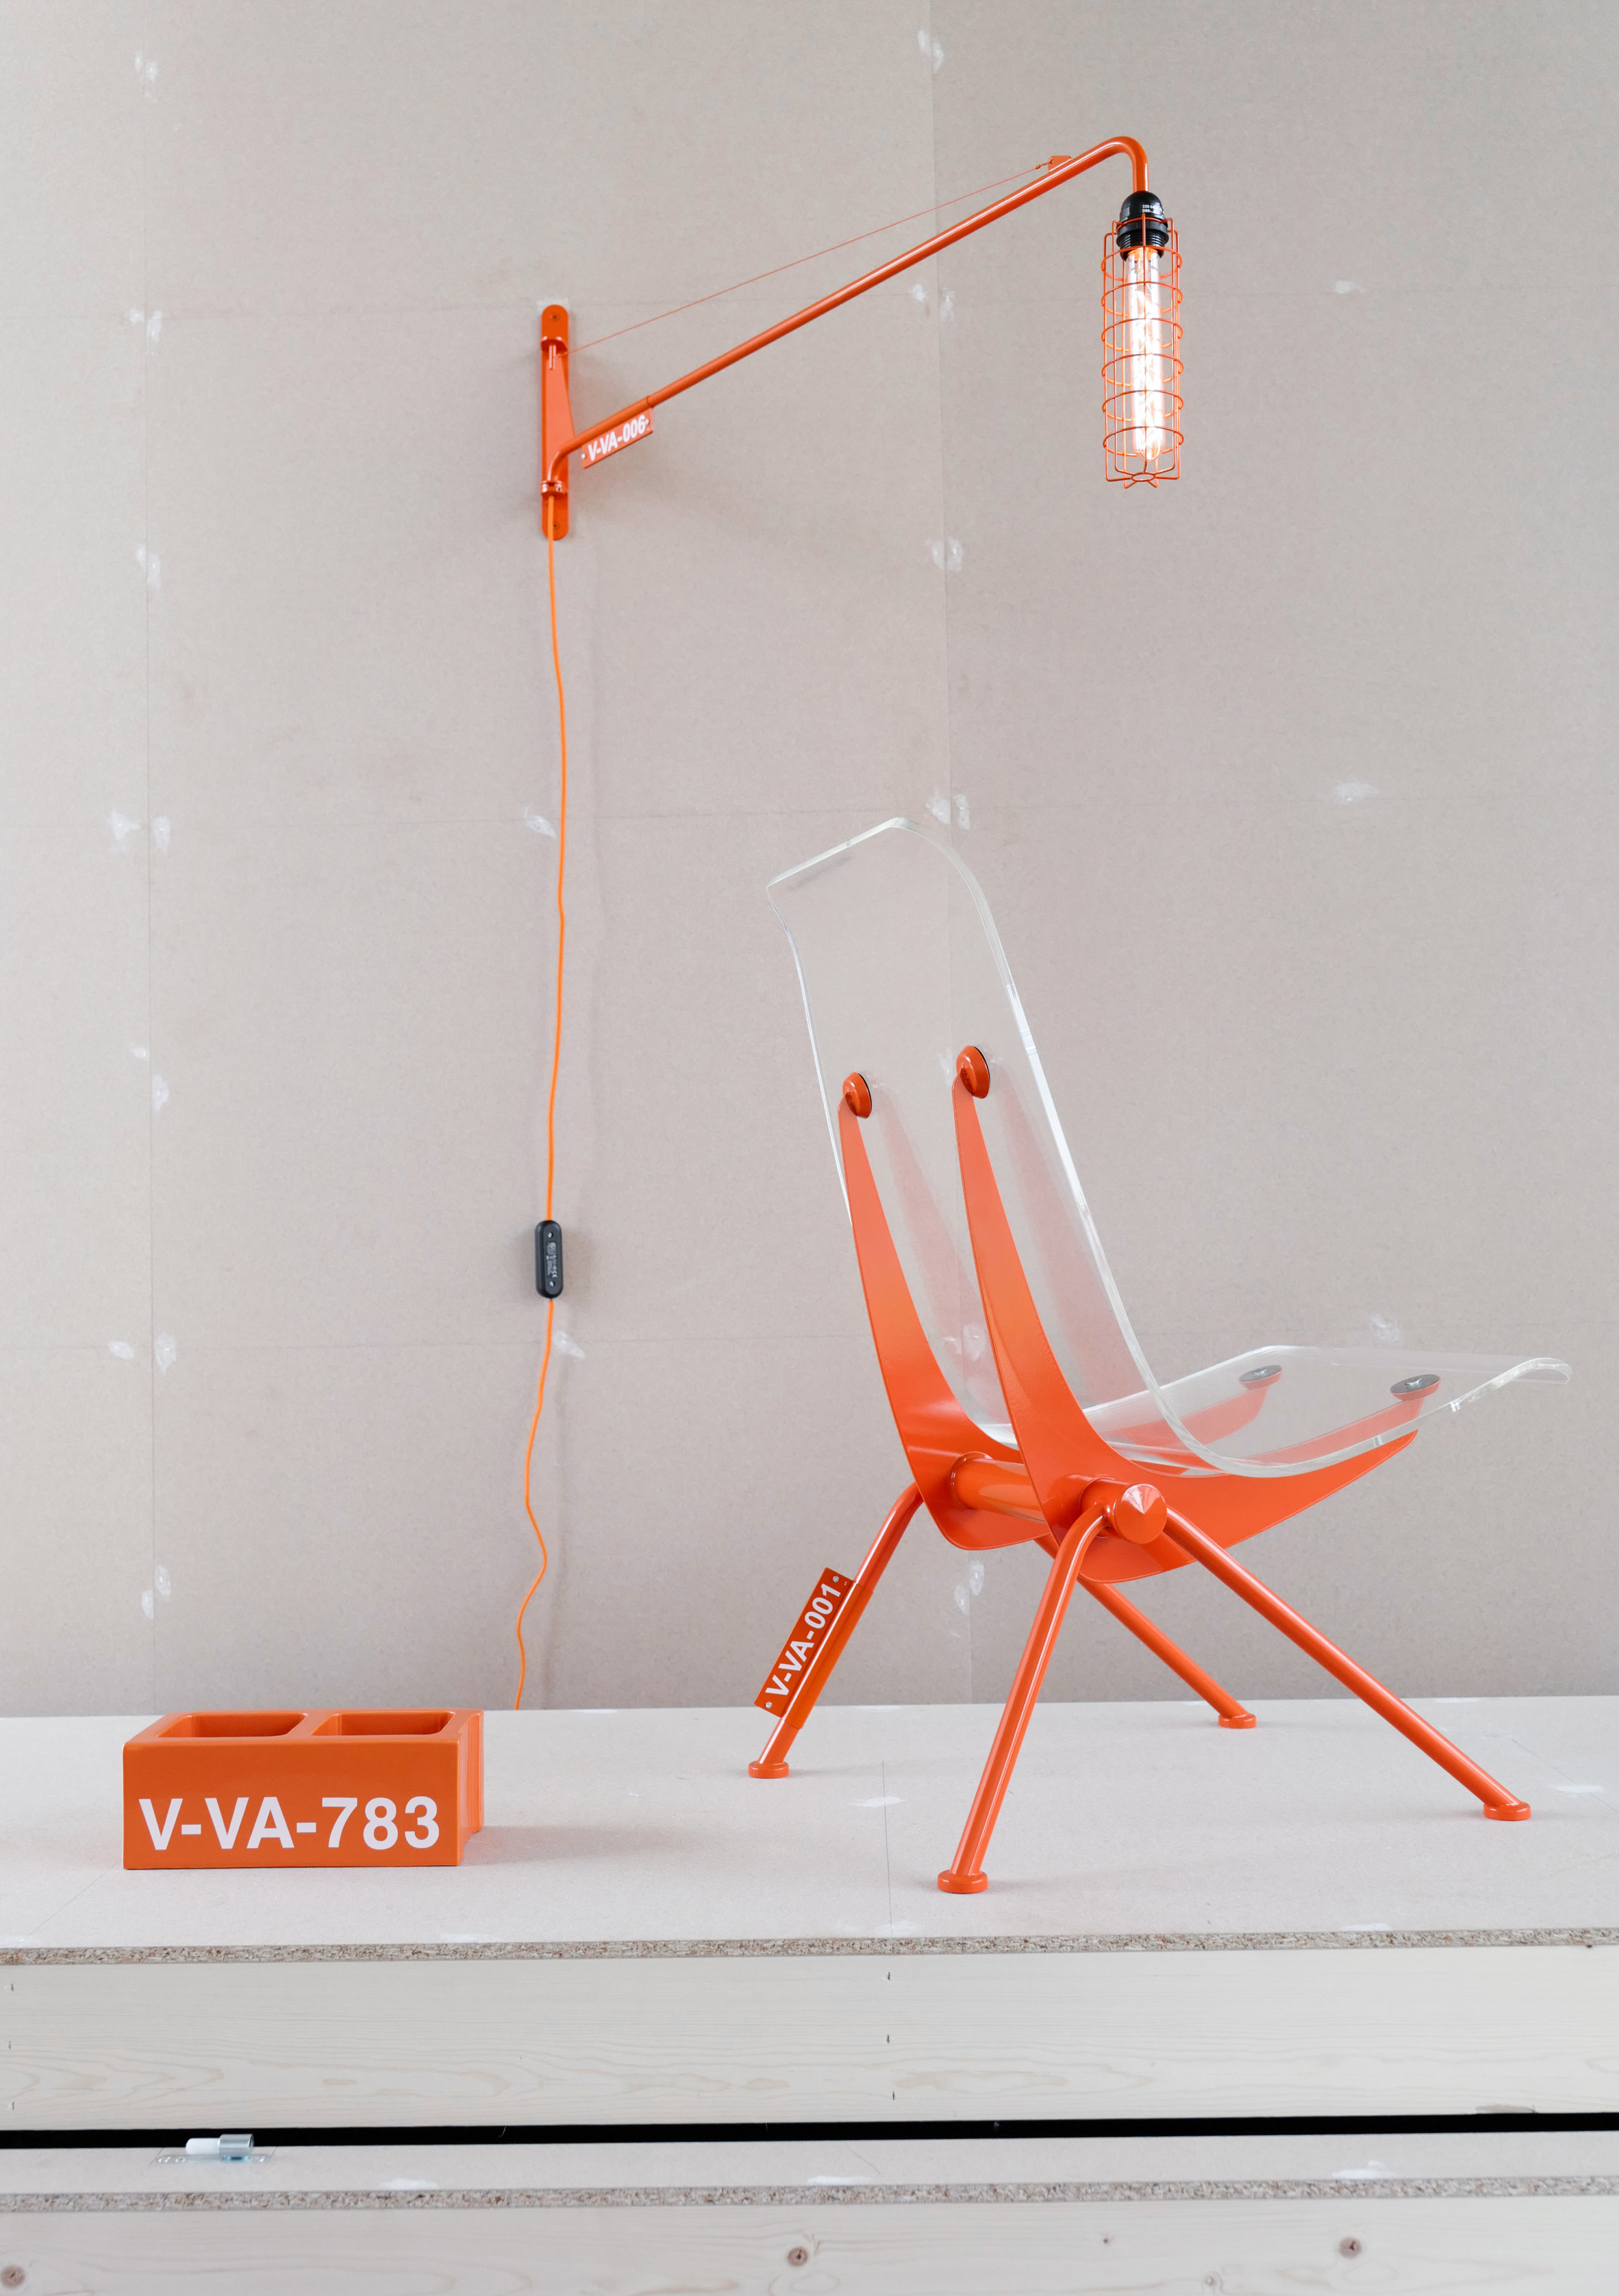 Vitra and Virgil Abloh Unveil Limited Edition Collection